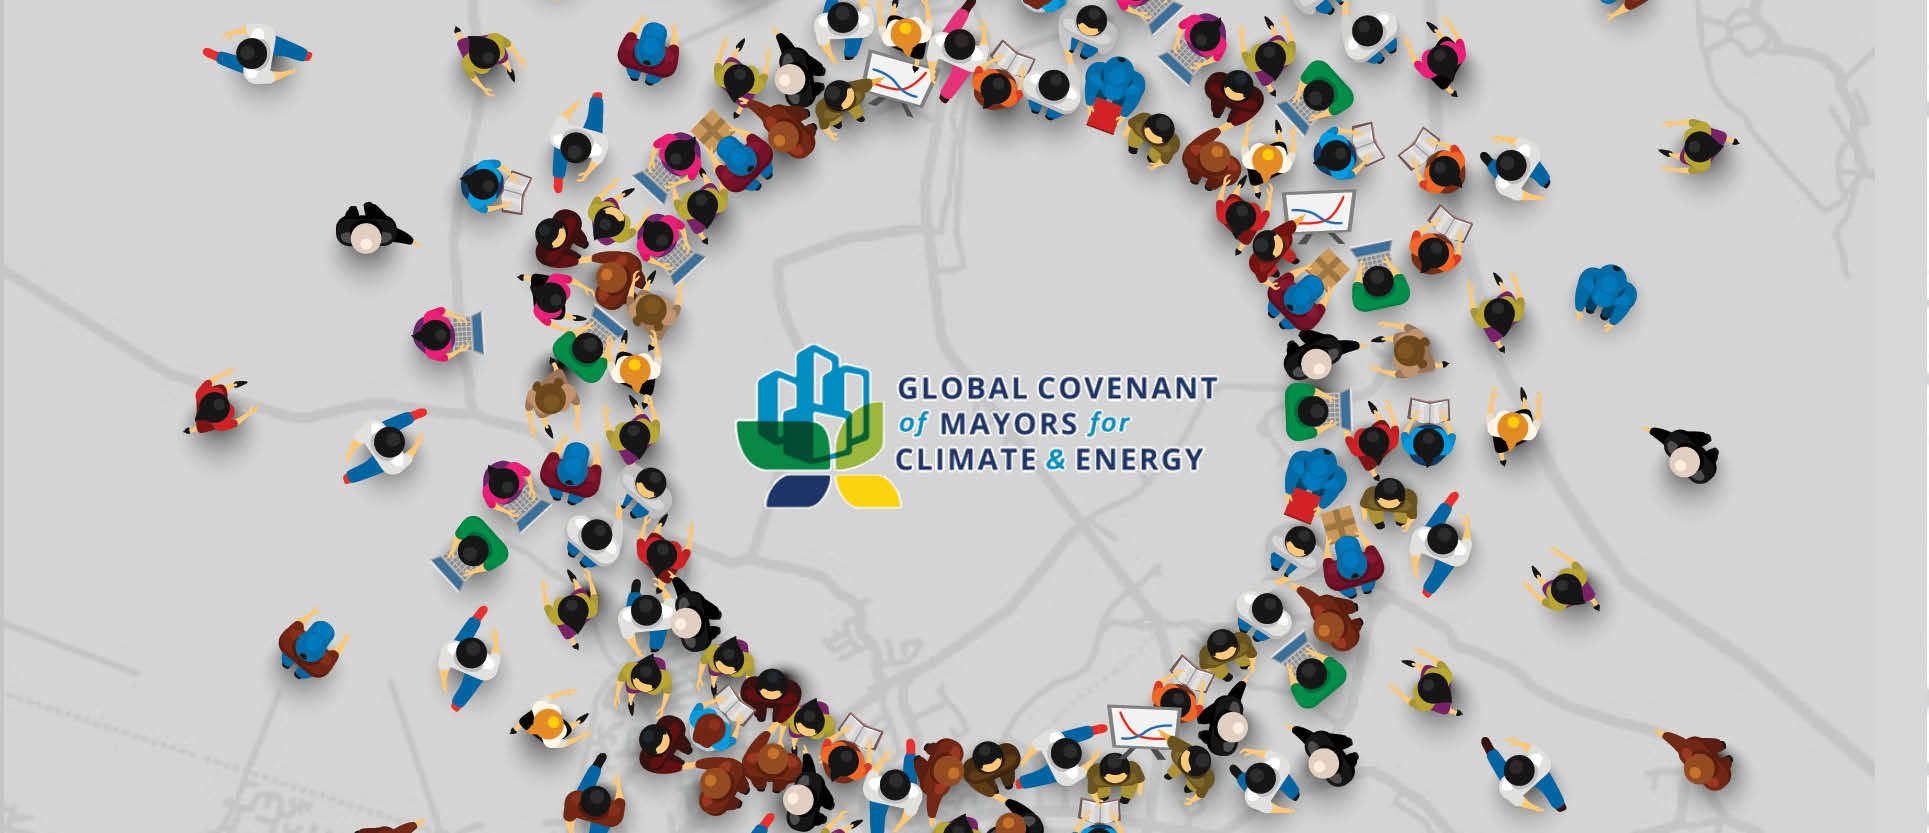 The Global Covenant of Mayors at the UCLG World Congress